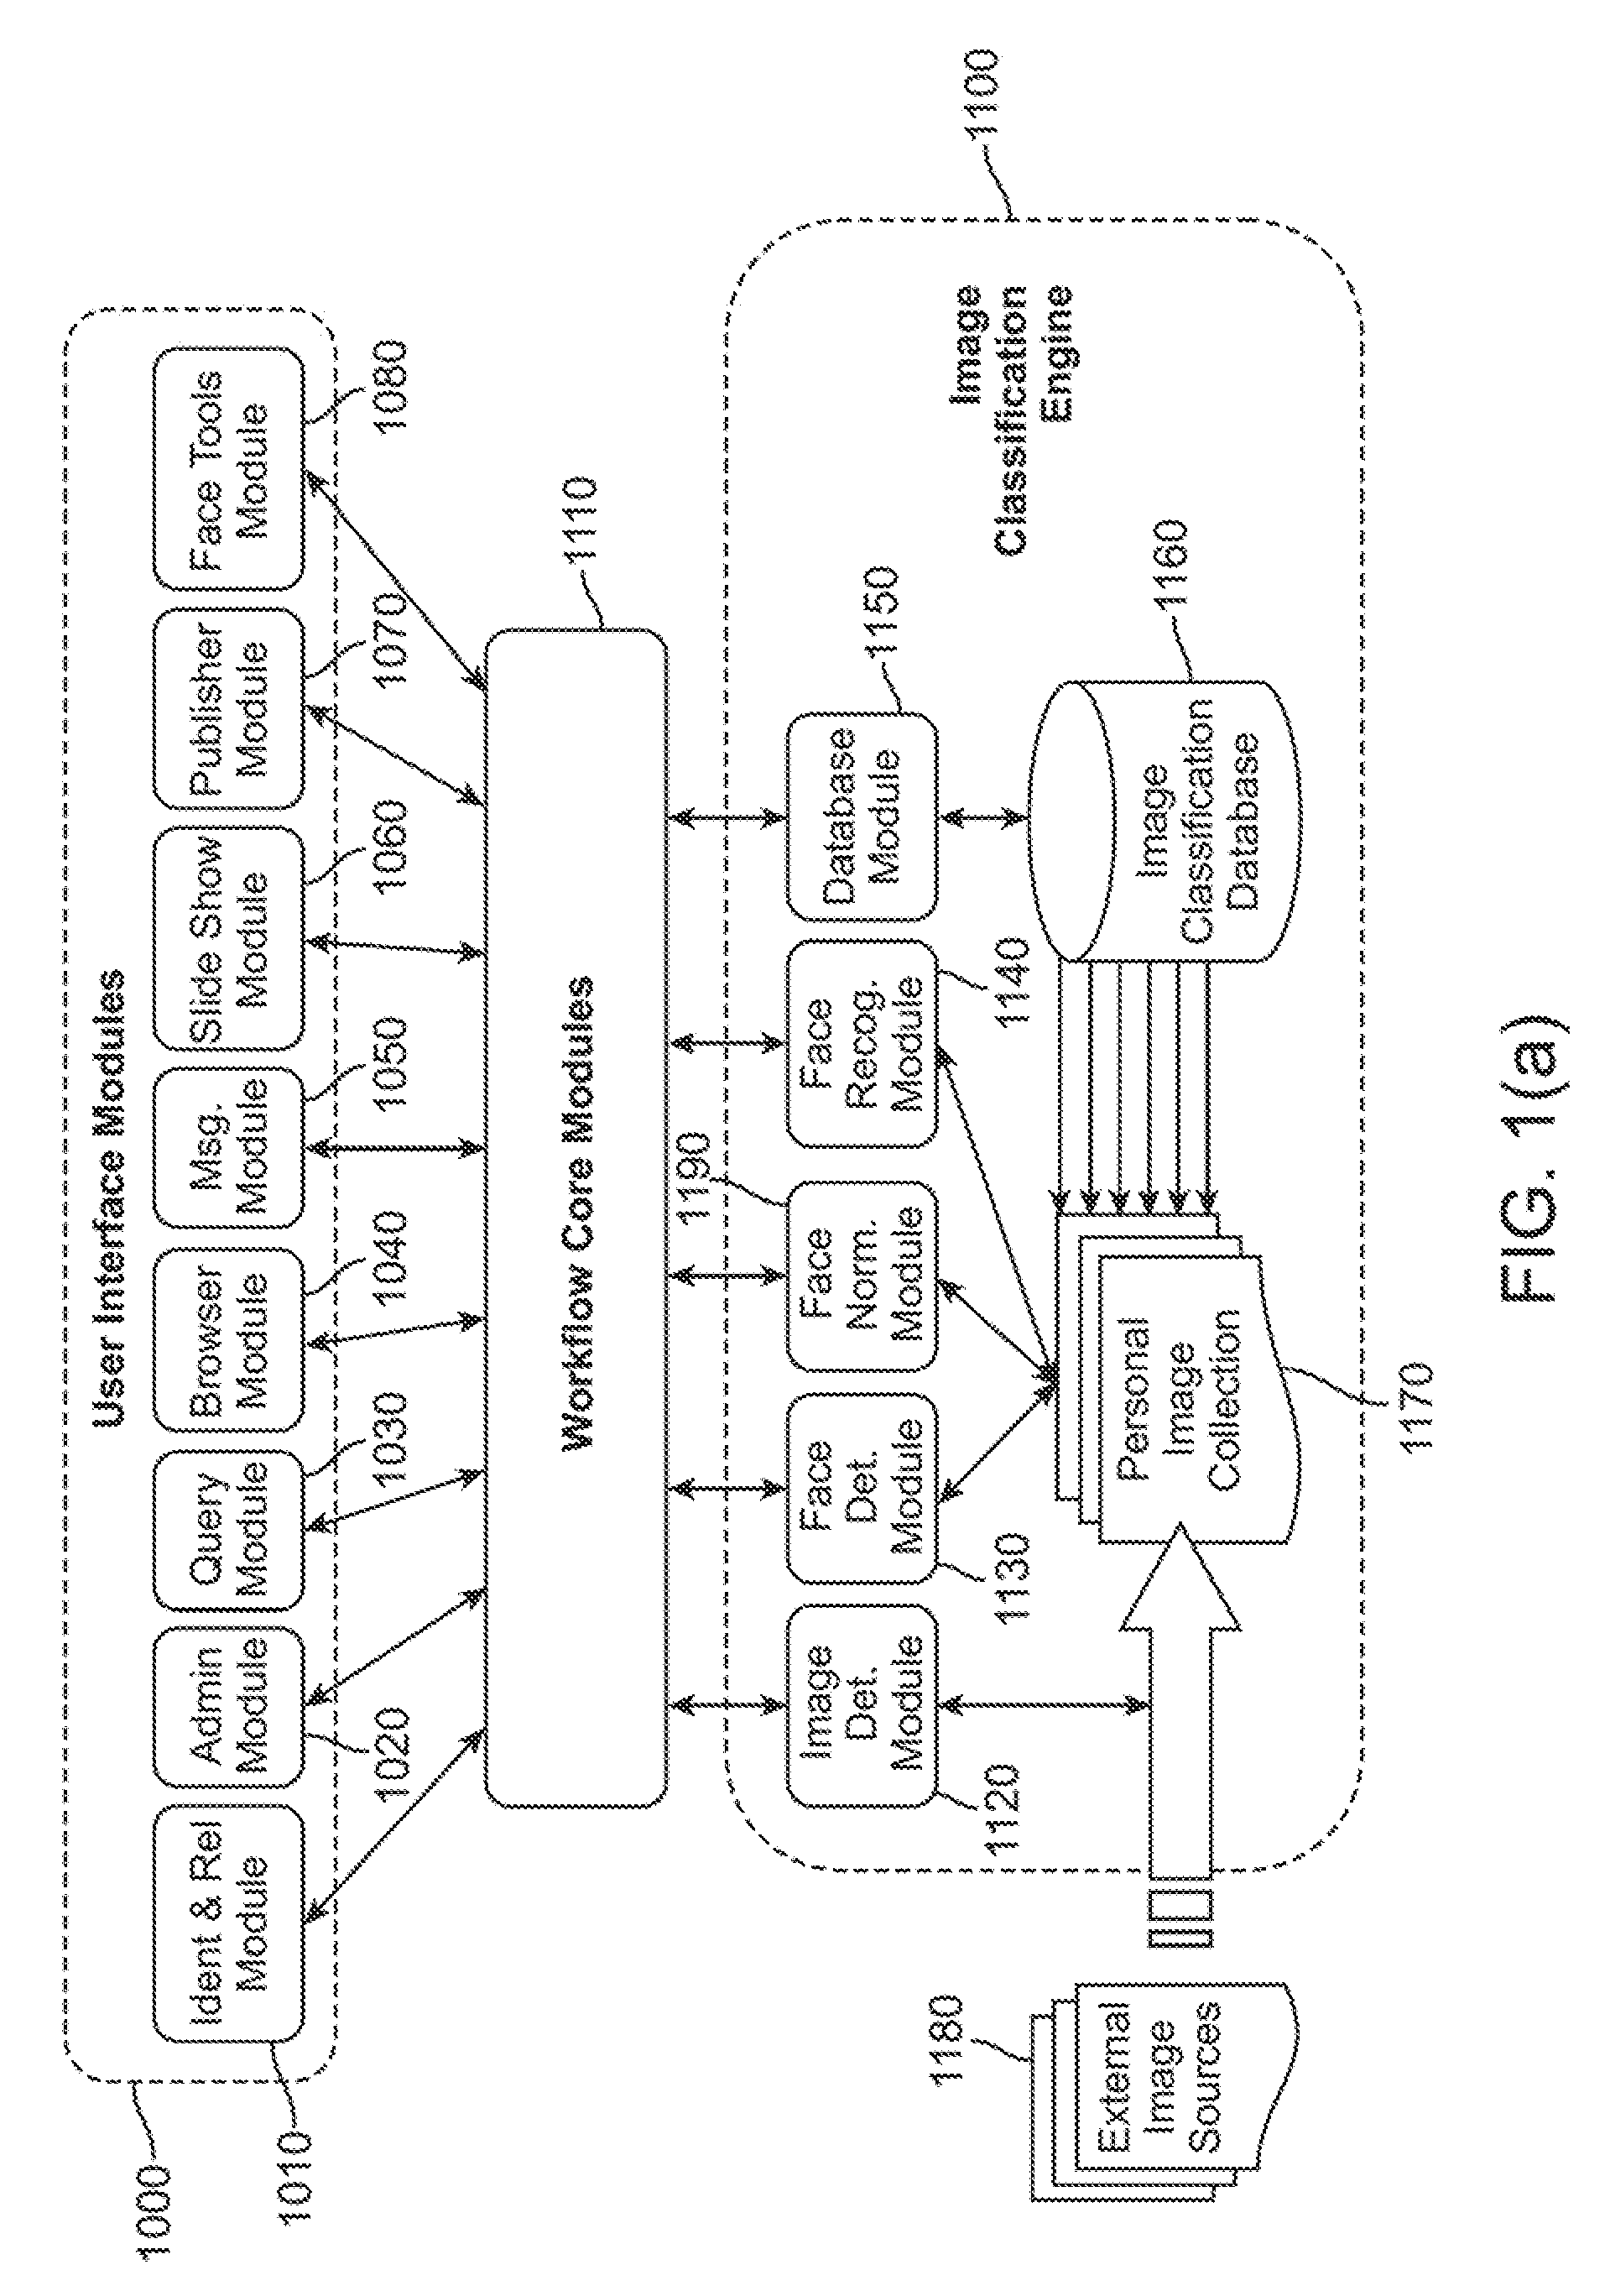 Classification System for Consumer Digital Images using Automatic Workflow and Face Detection and Recognition